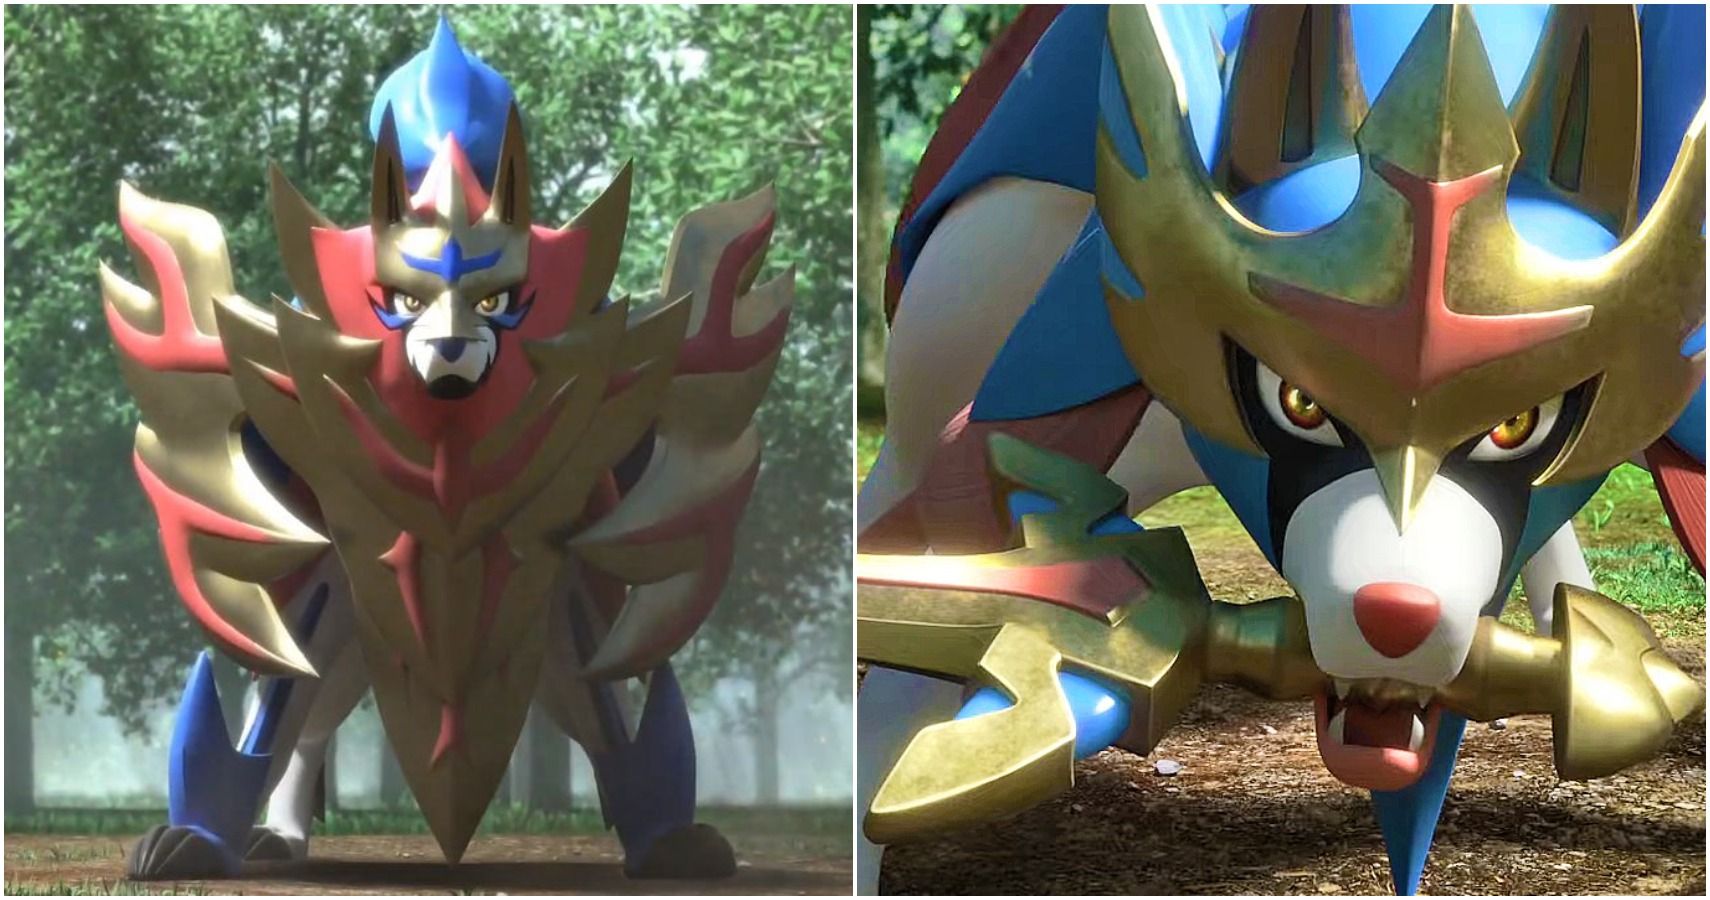 Which Pokemon version should you pick - Sword or Shield?